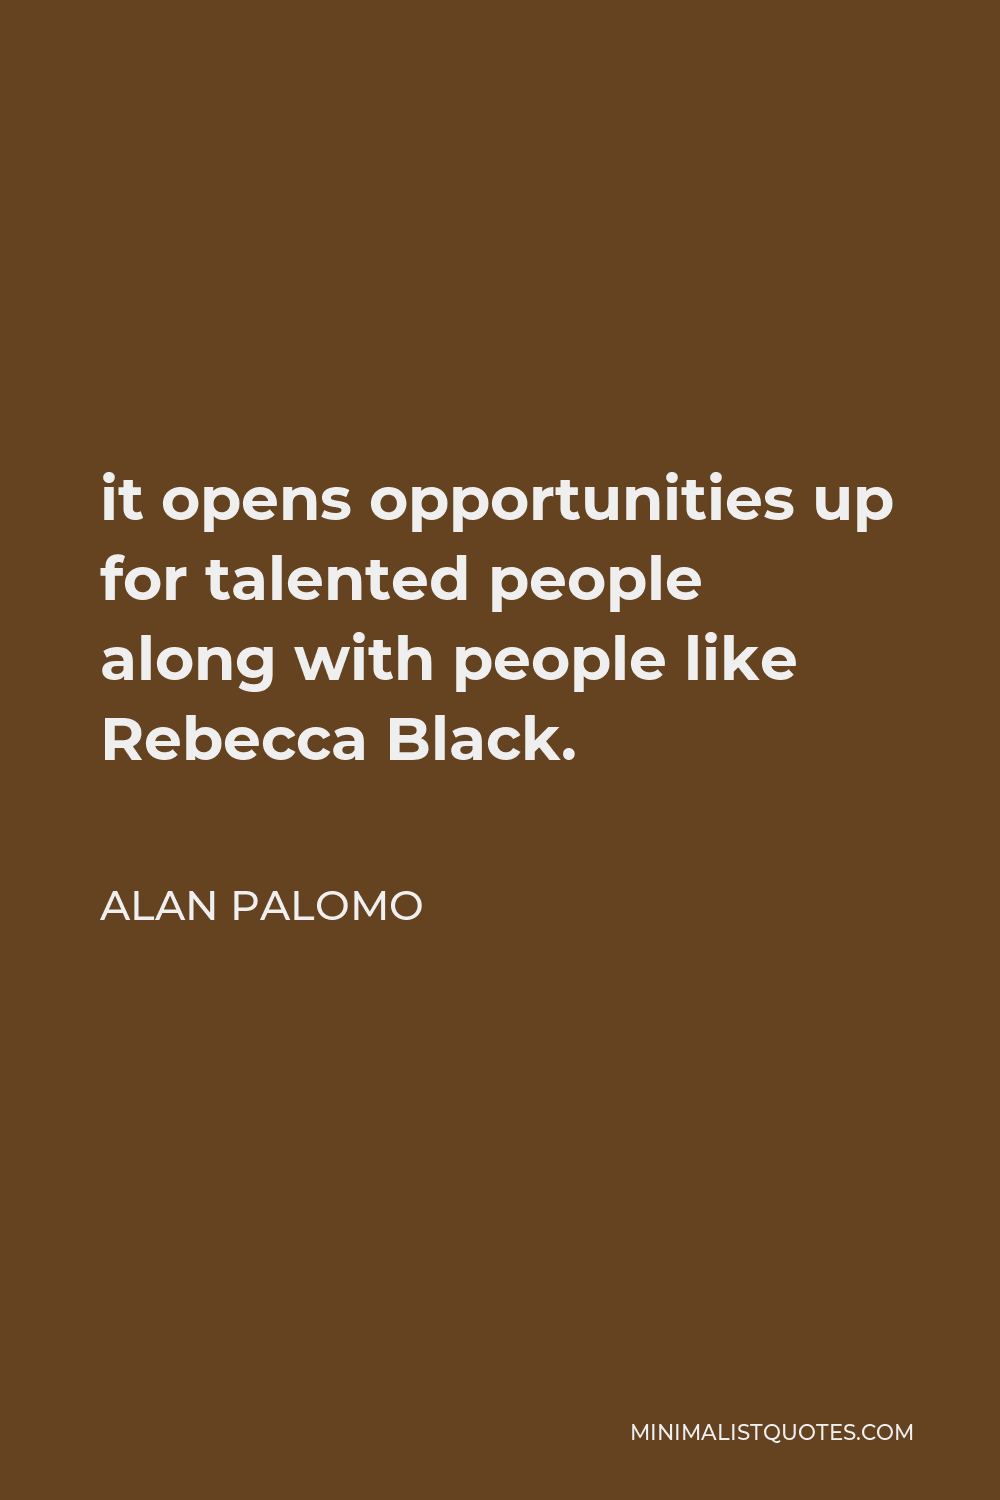 Alan Palomo Quote - it opens opportunities up for talented people along with people like Rebecca Black.